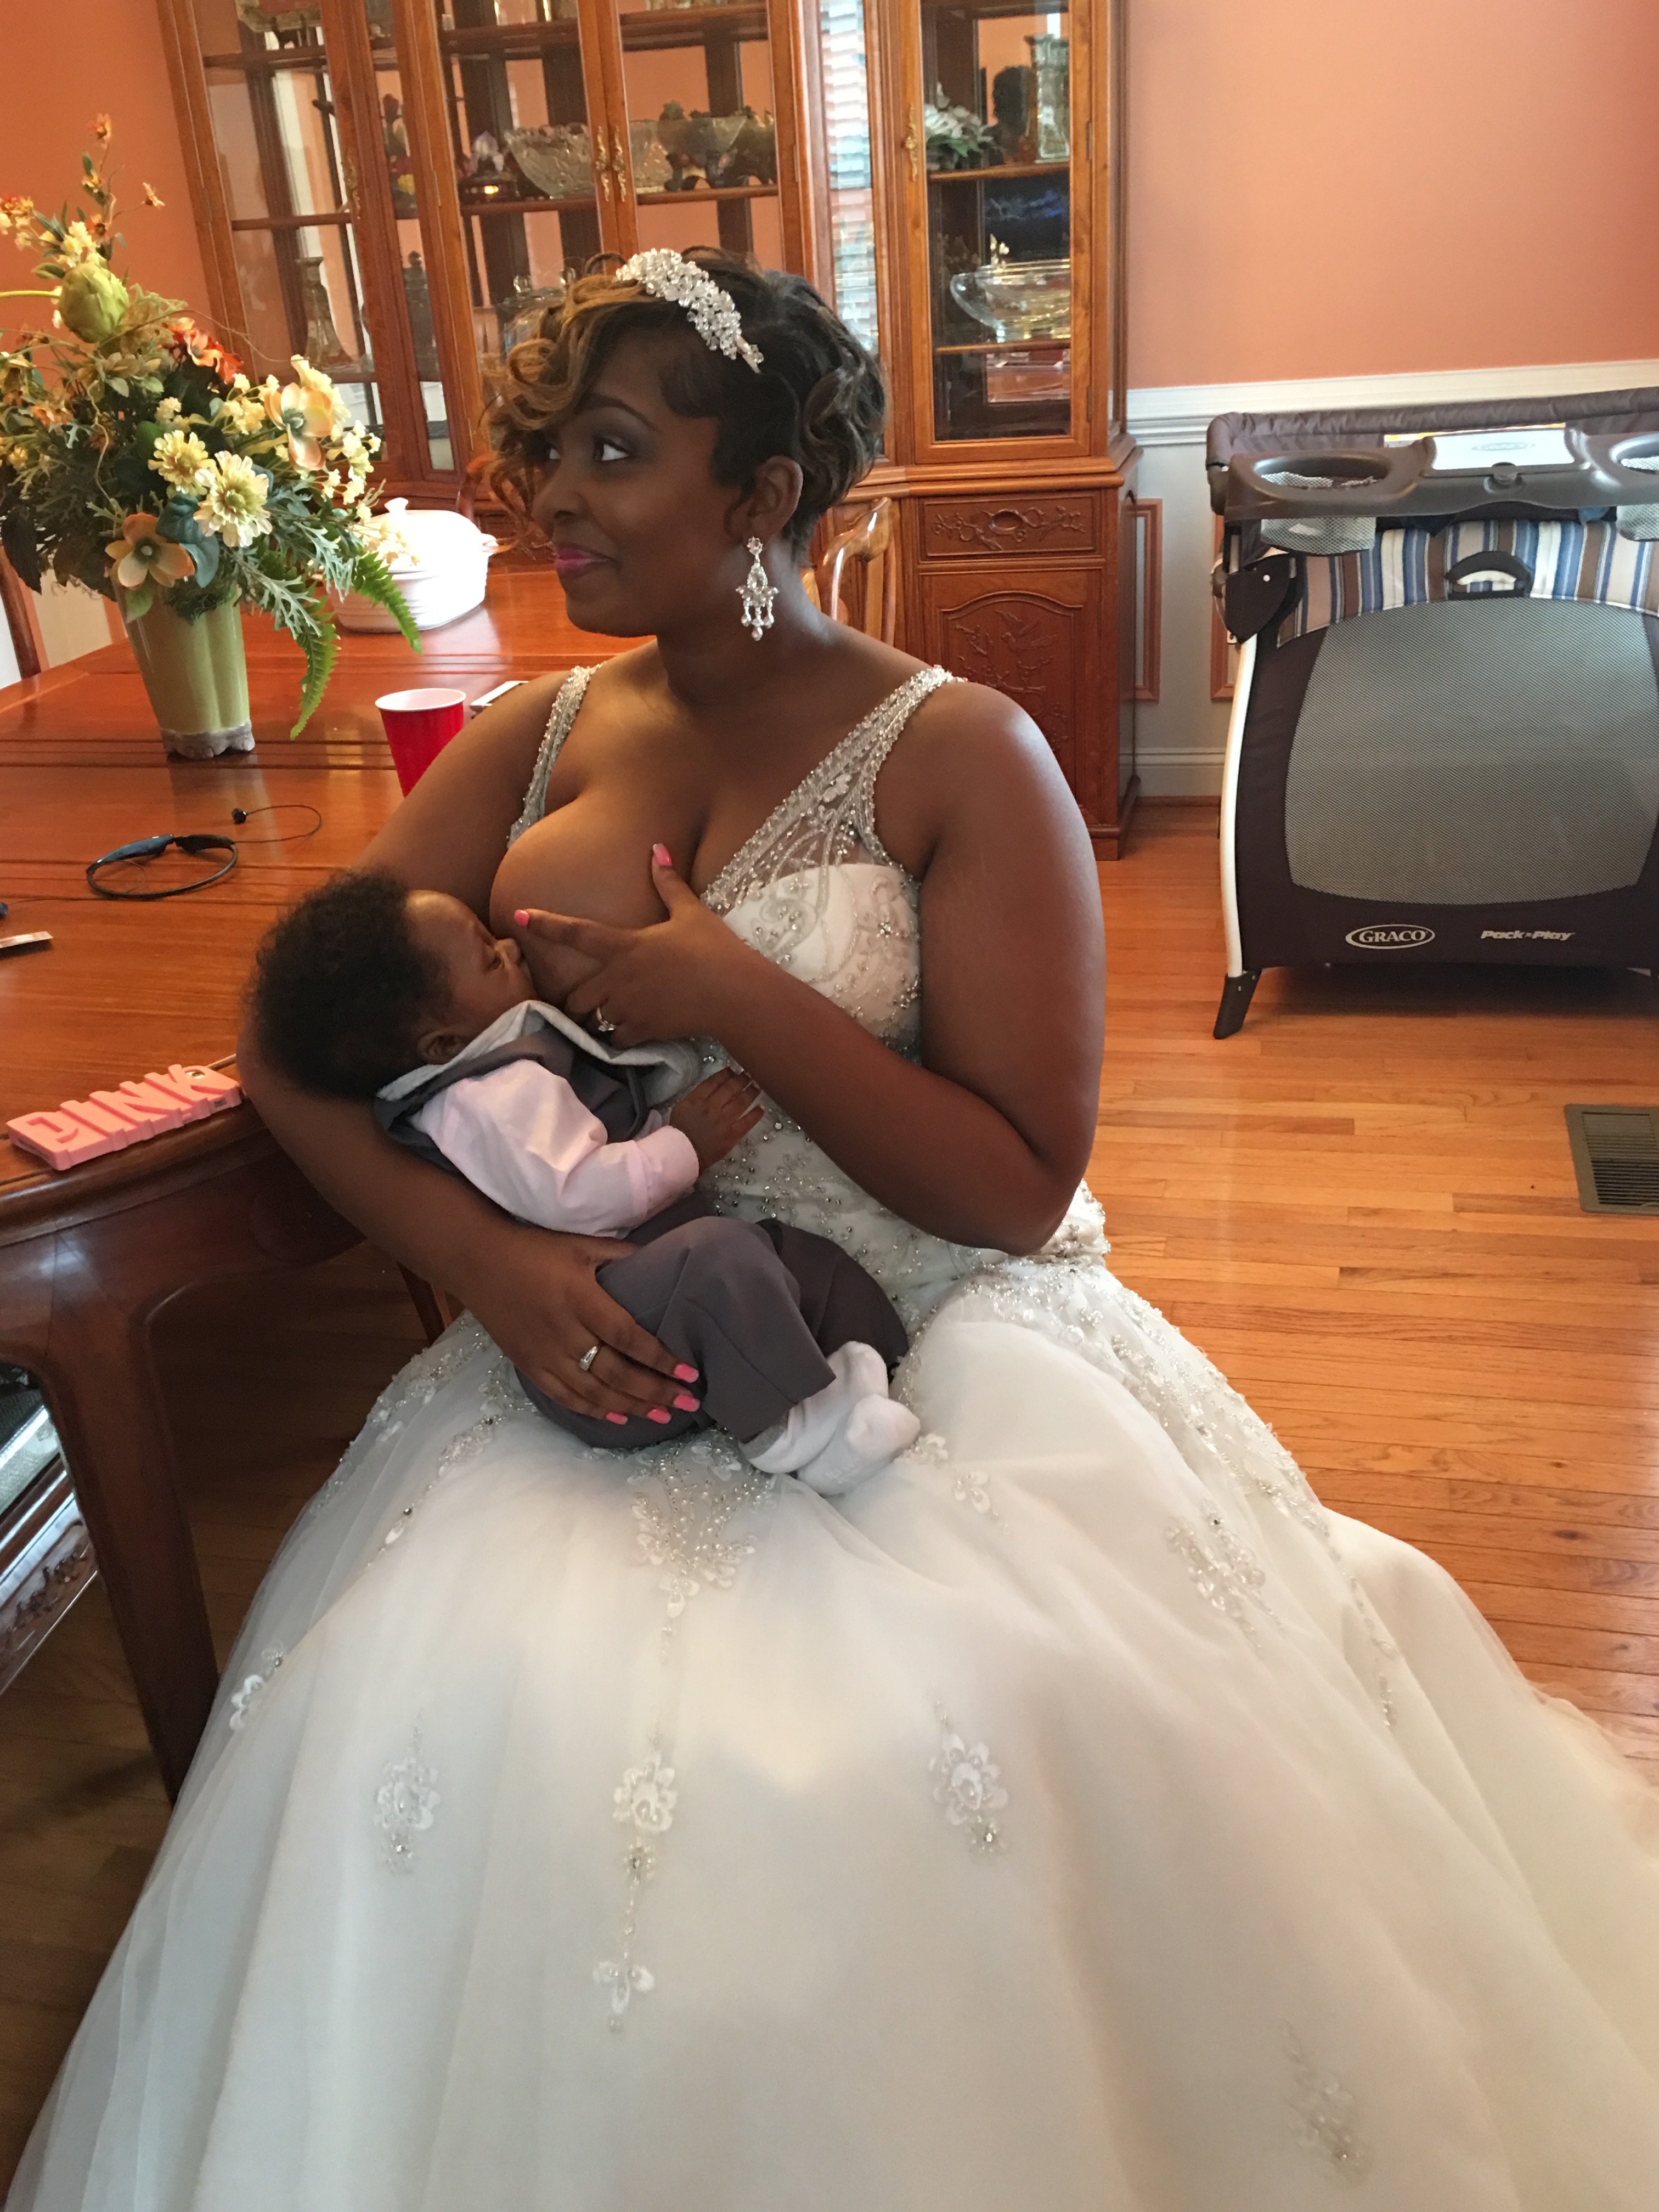 Breastfeed Her Son At Her Wedding. wedding dresses for breastfeeding mother...